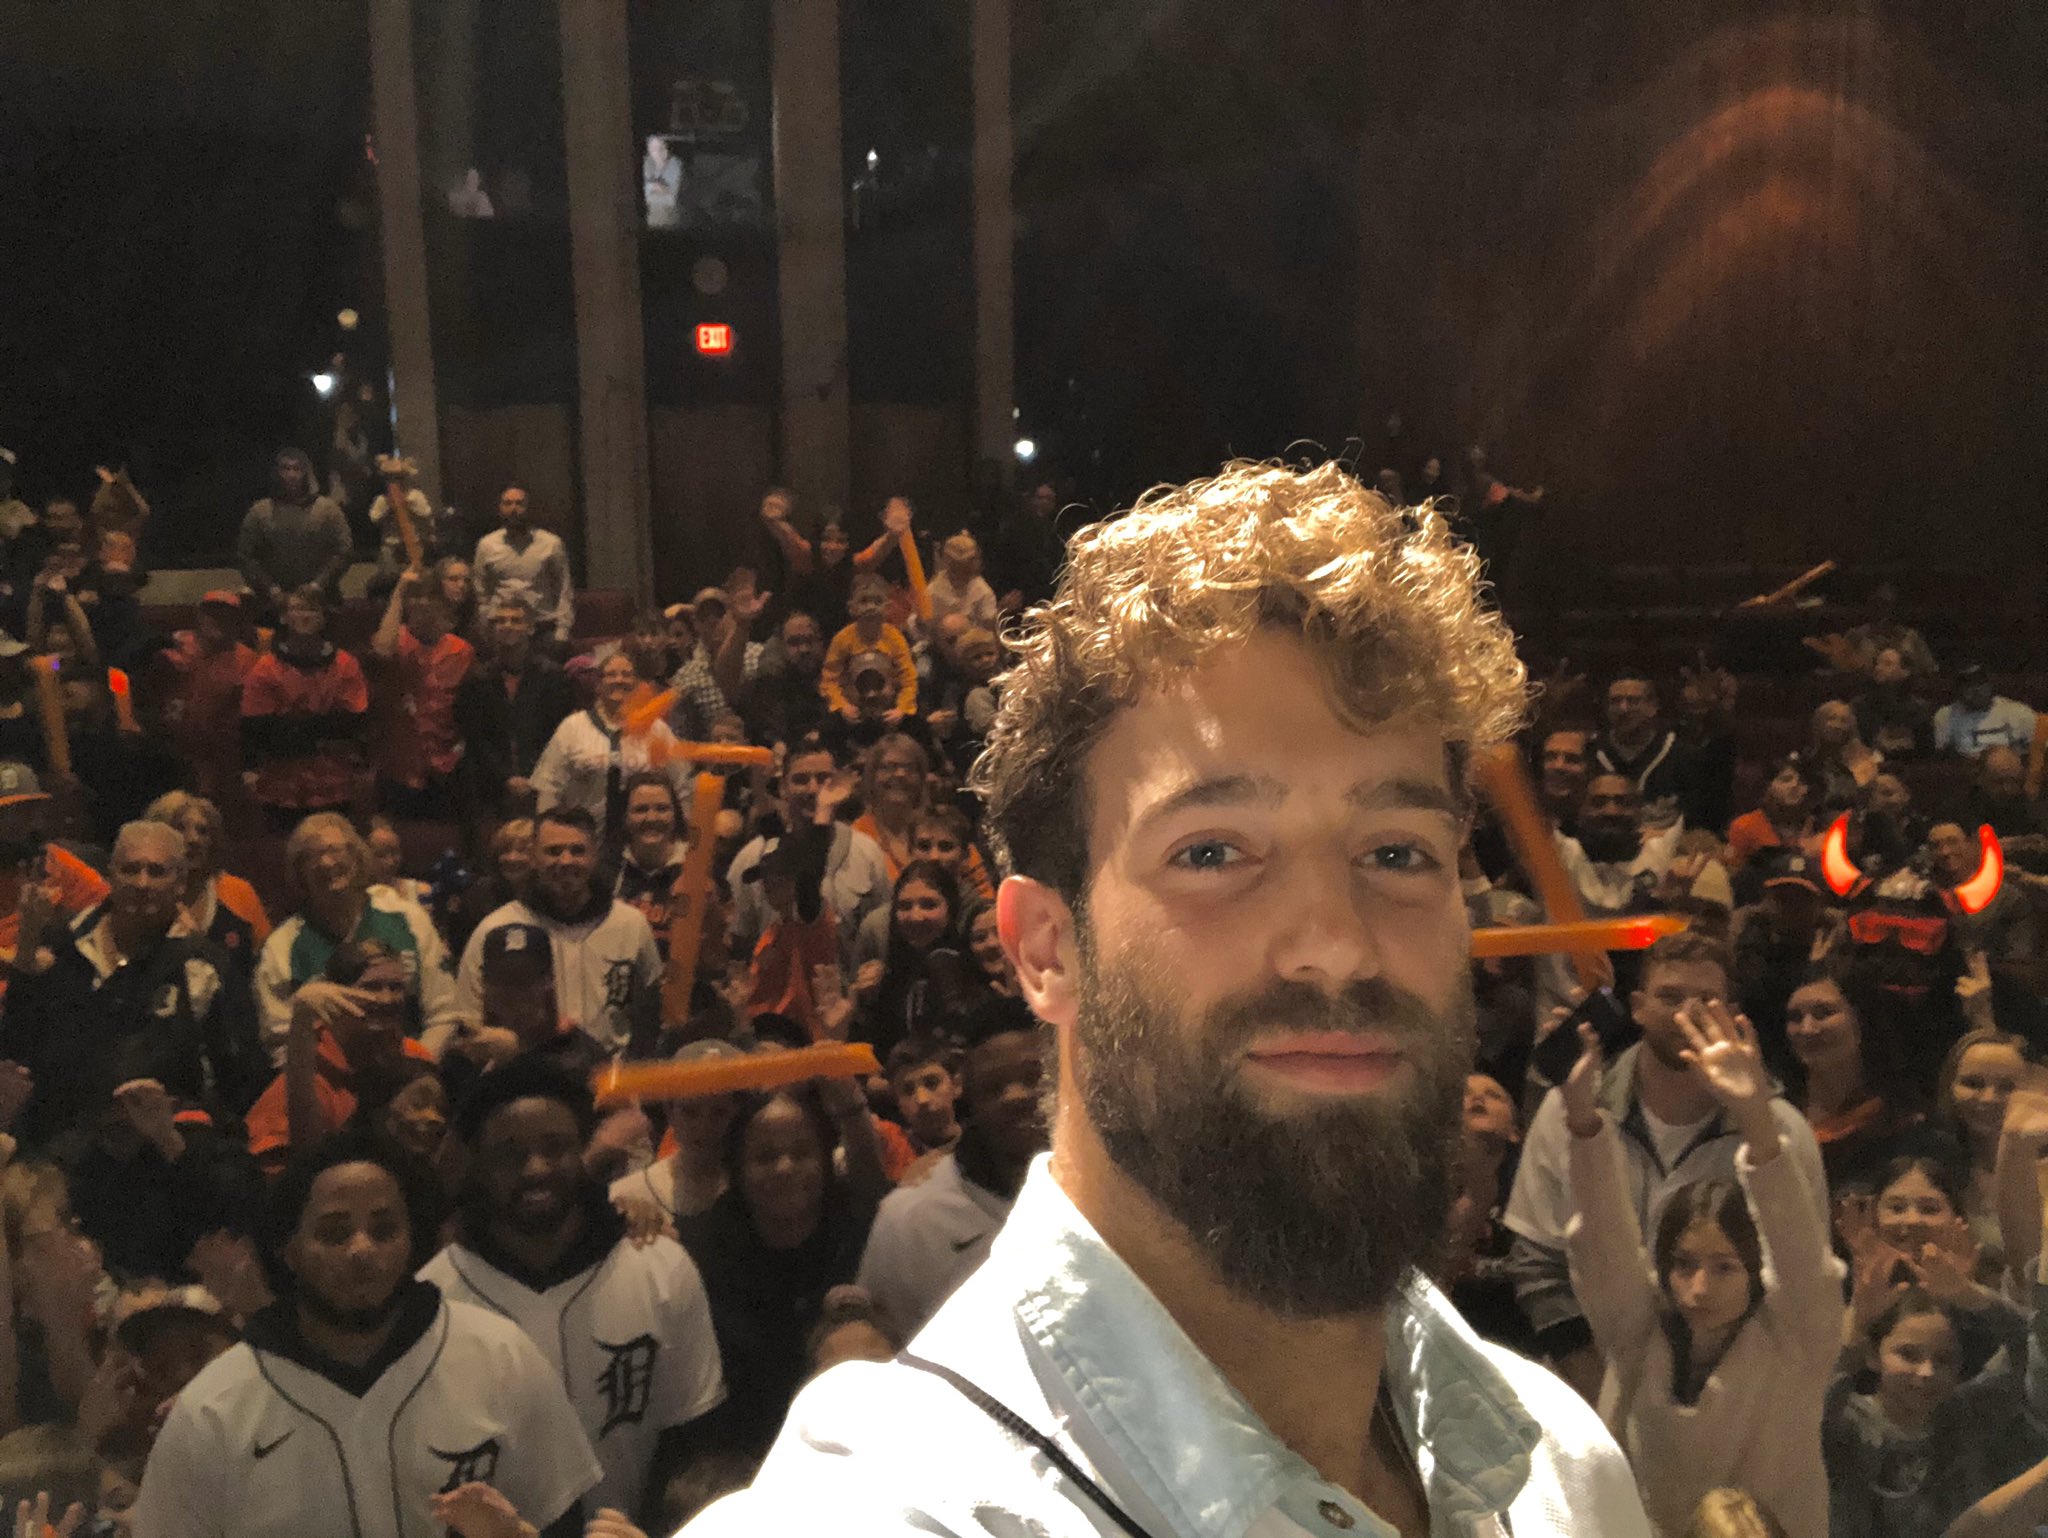 Daniel Norris on X: Thanks for all the support @tigers fans https